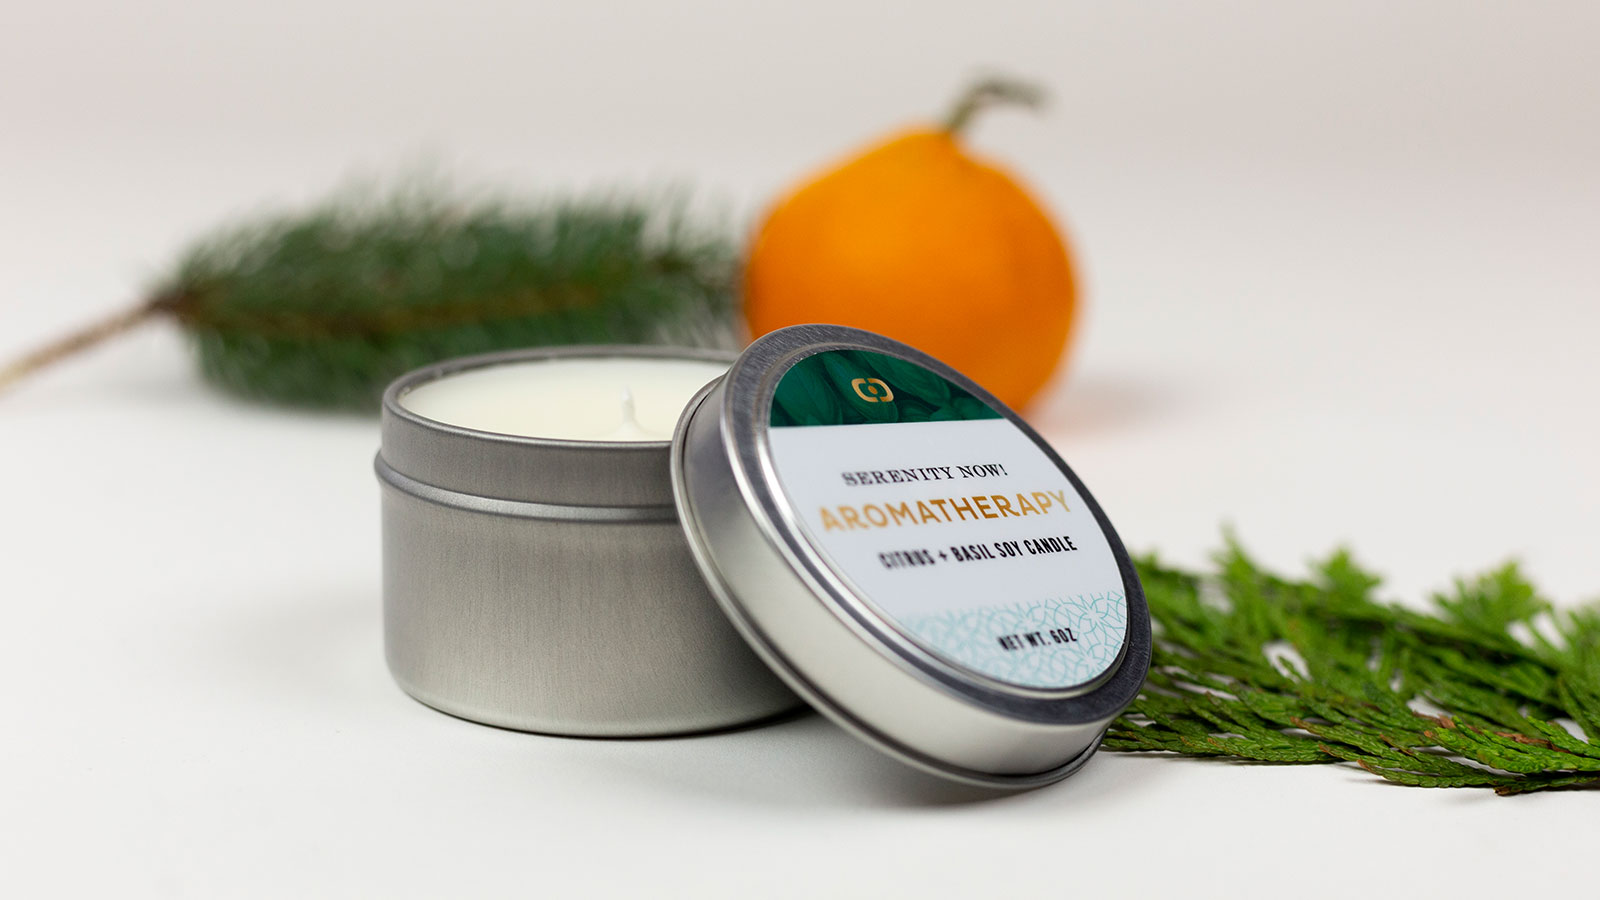 Delin Design Holiday 2018 Stress Kit Direct-Mail Promotion: "Serenity Now!" Citrus Basil Candle